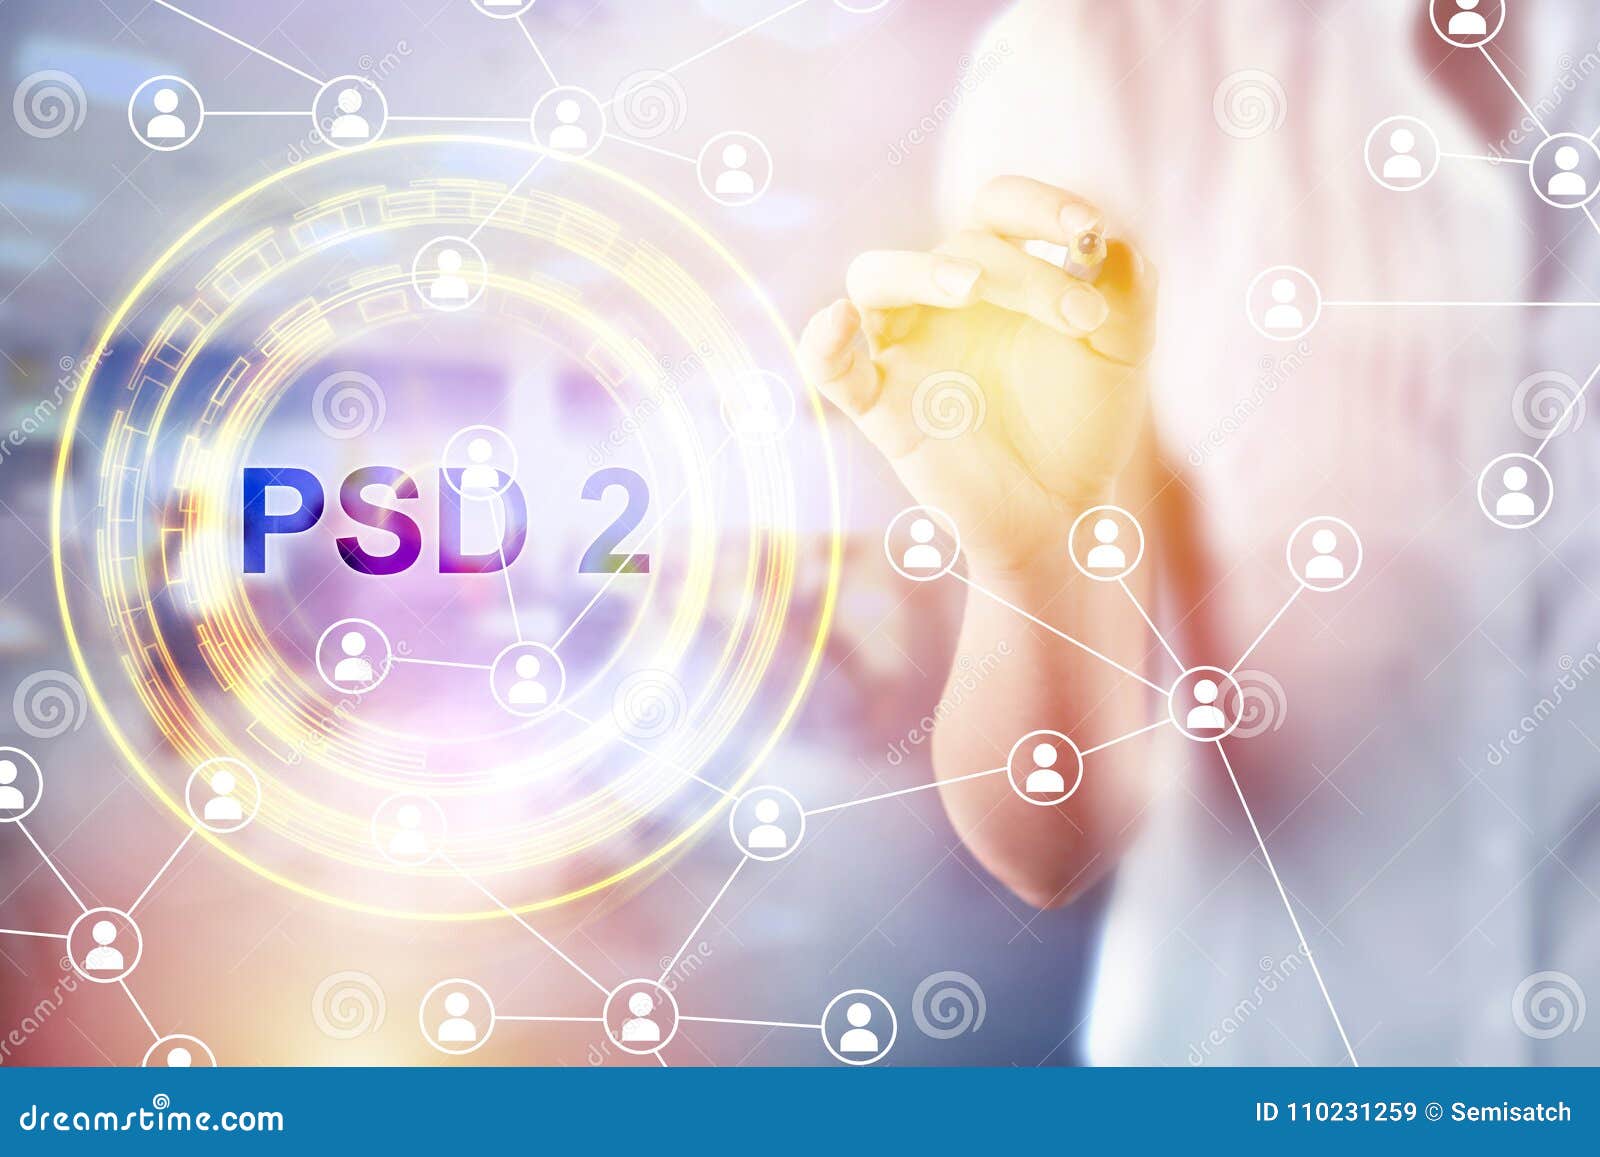 concept of psd2 - payment services directive